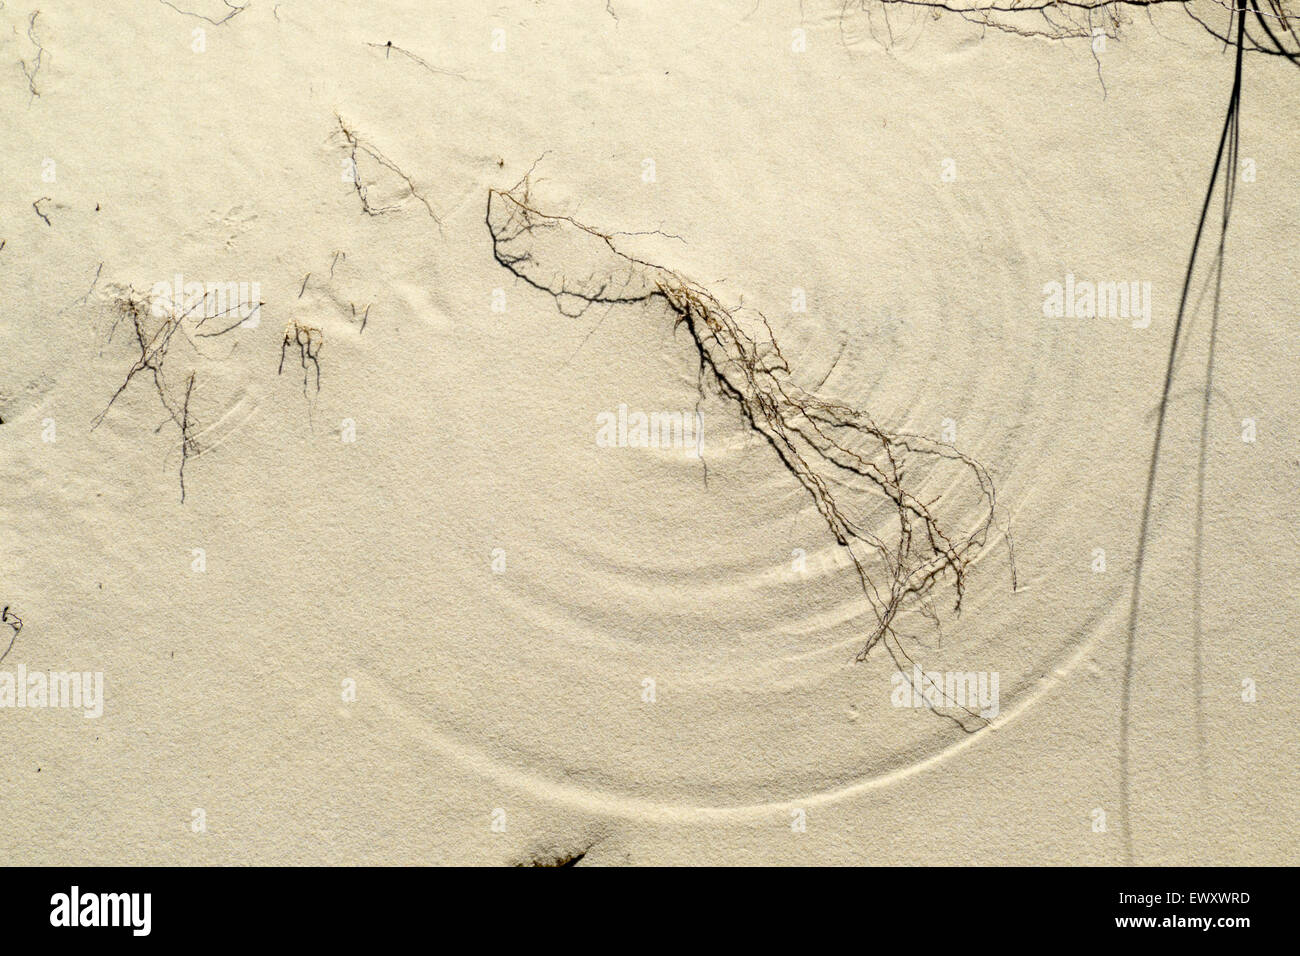 Circles etched in the sand by windblown ground cover on the beach of the Gulf of Mexico near Gulf Shores, Alabama. Stock Photo